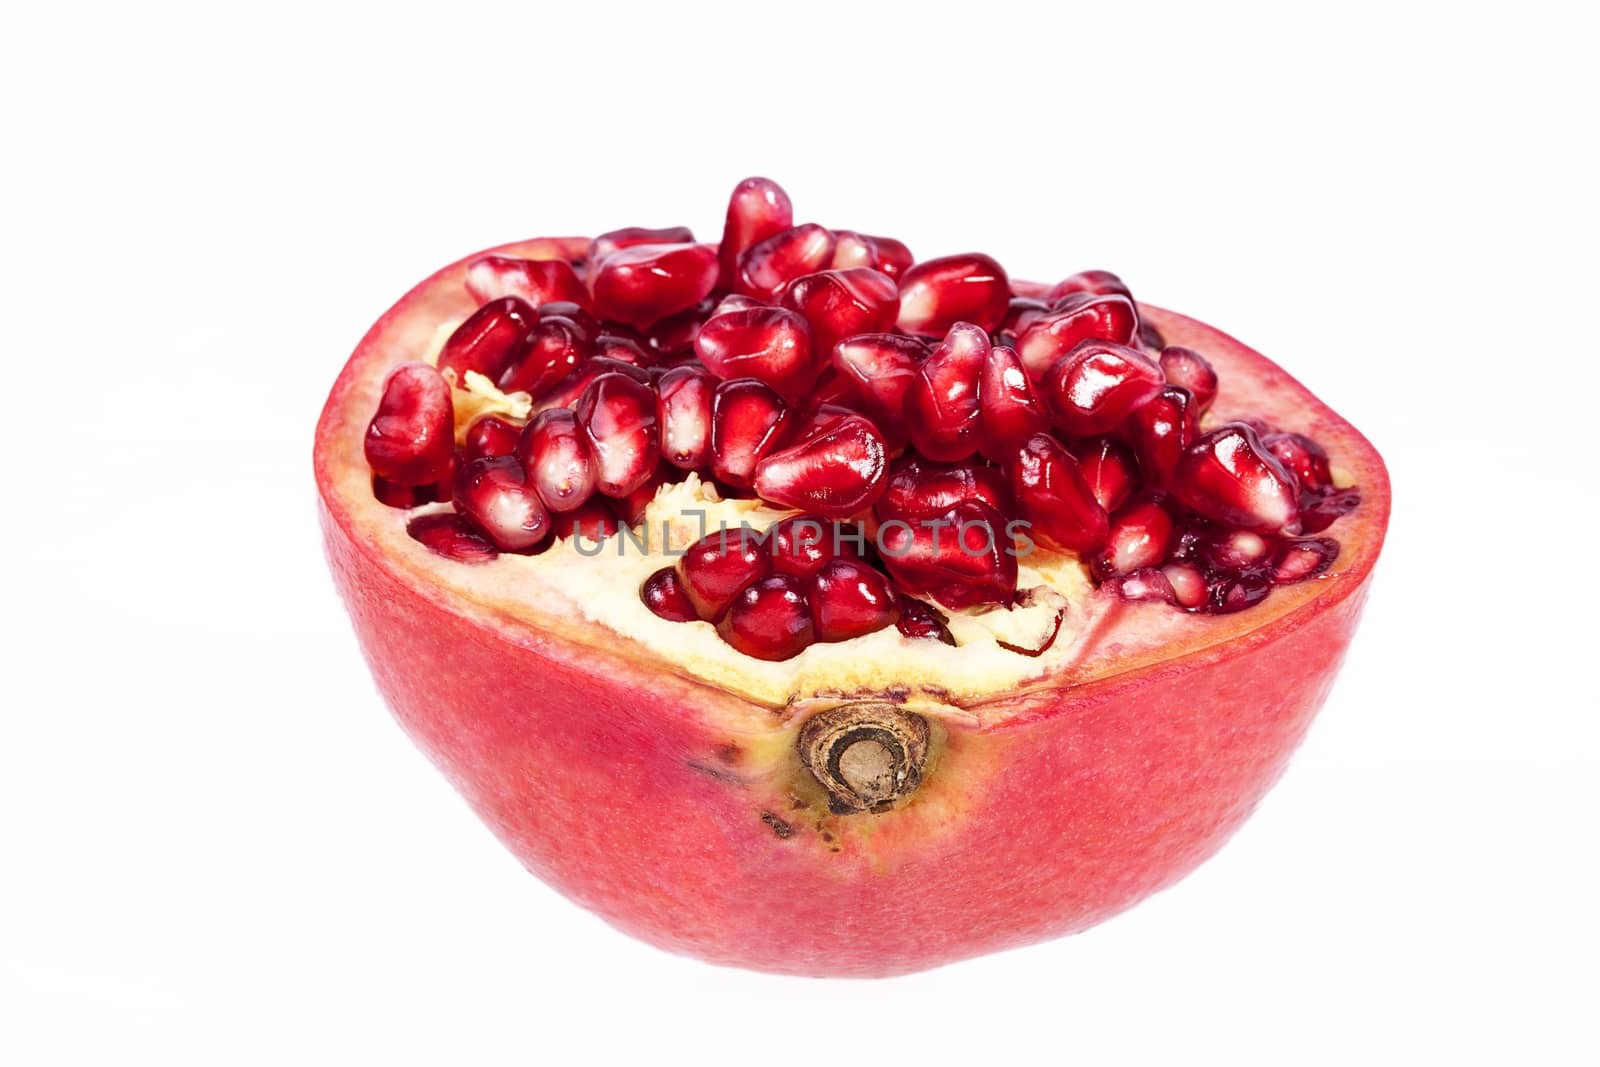  Half fruit of red pomegranate isolated on white background, close up.